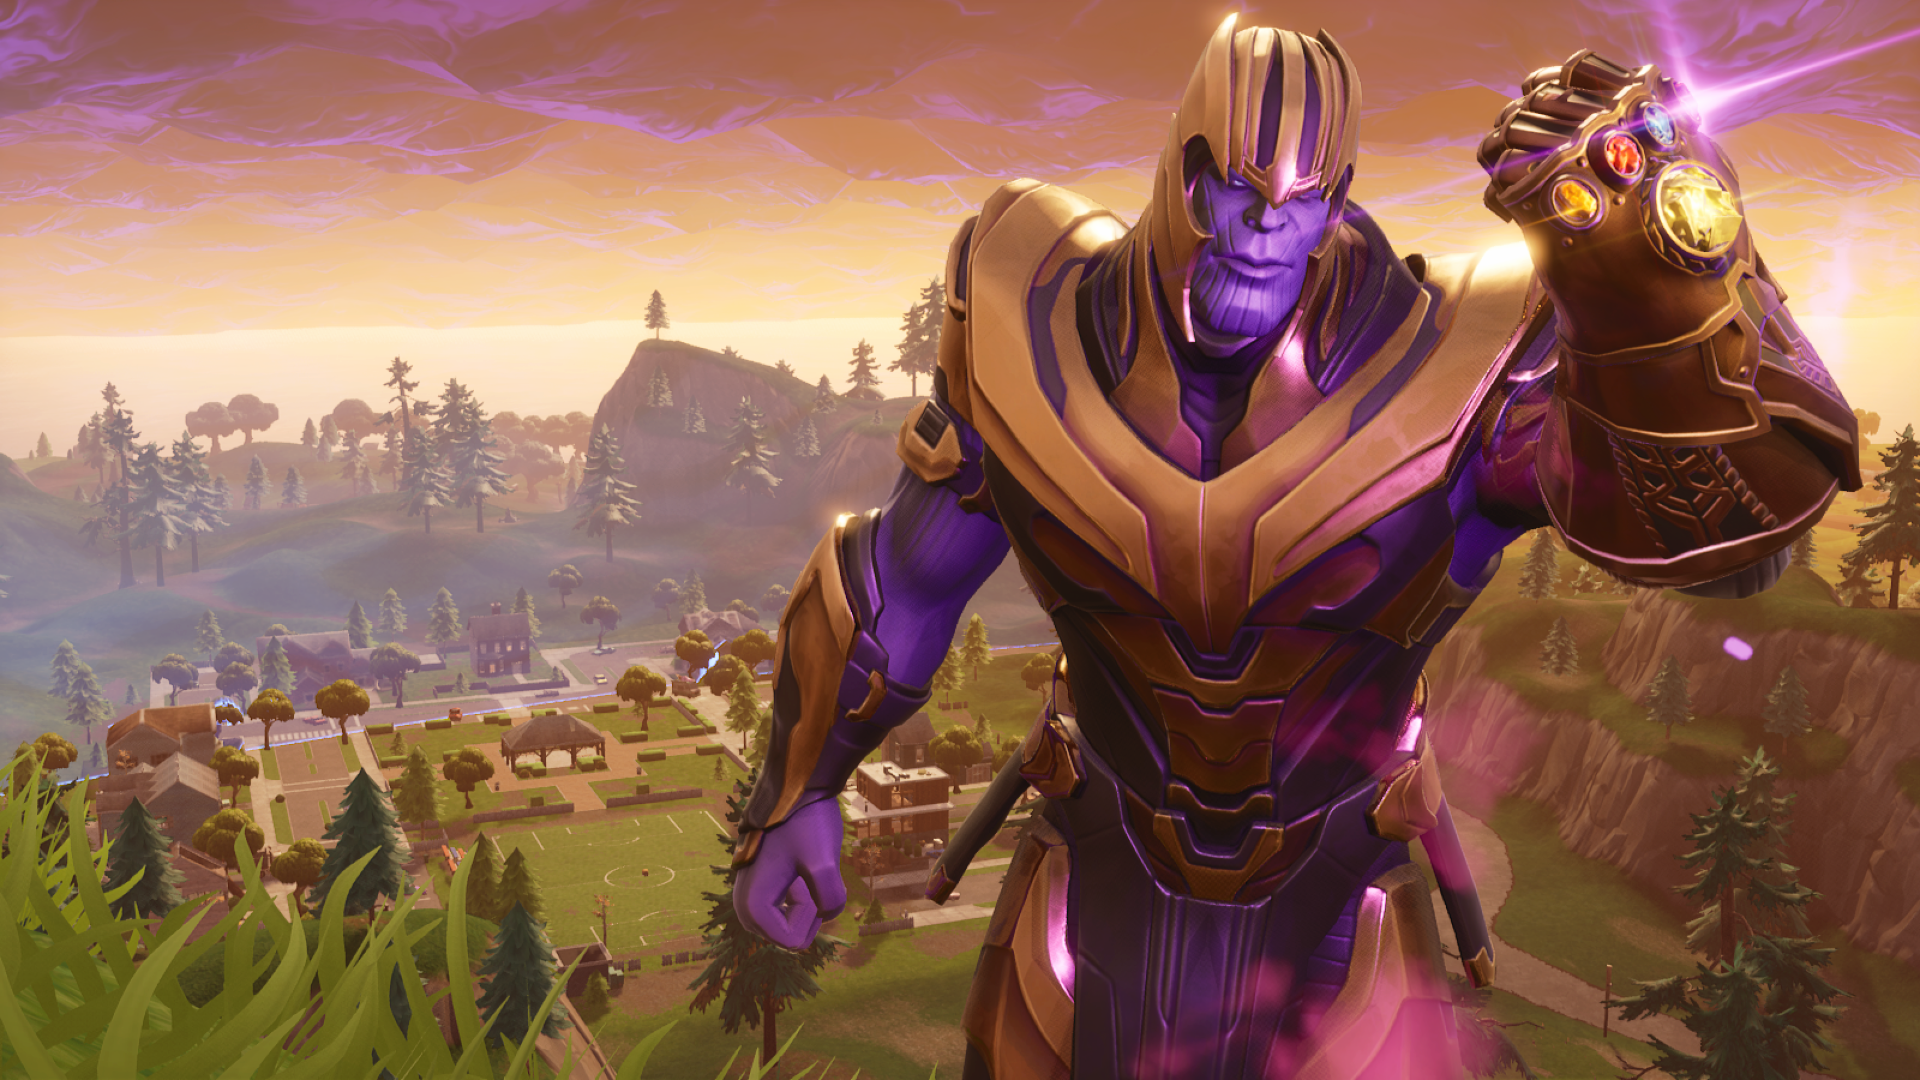 Thanos in Fortnite HD Wallpaper. Background Imagex1080